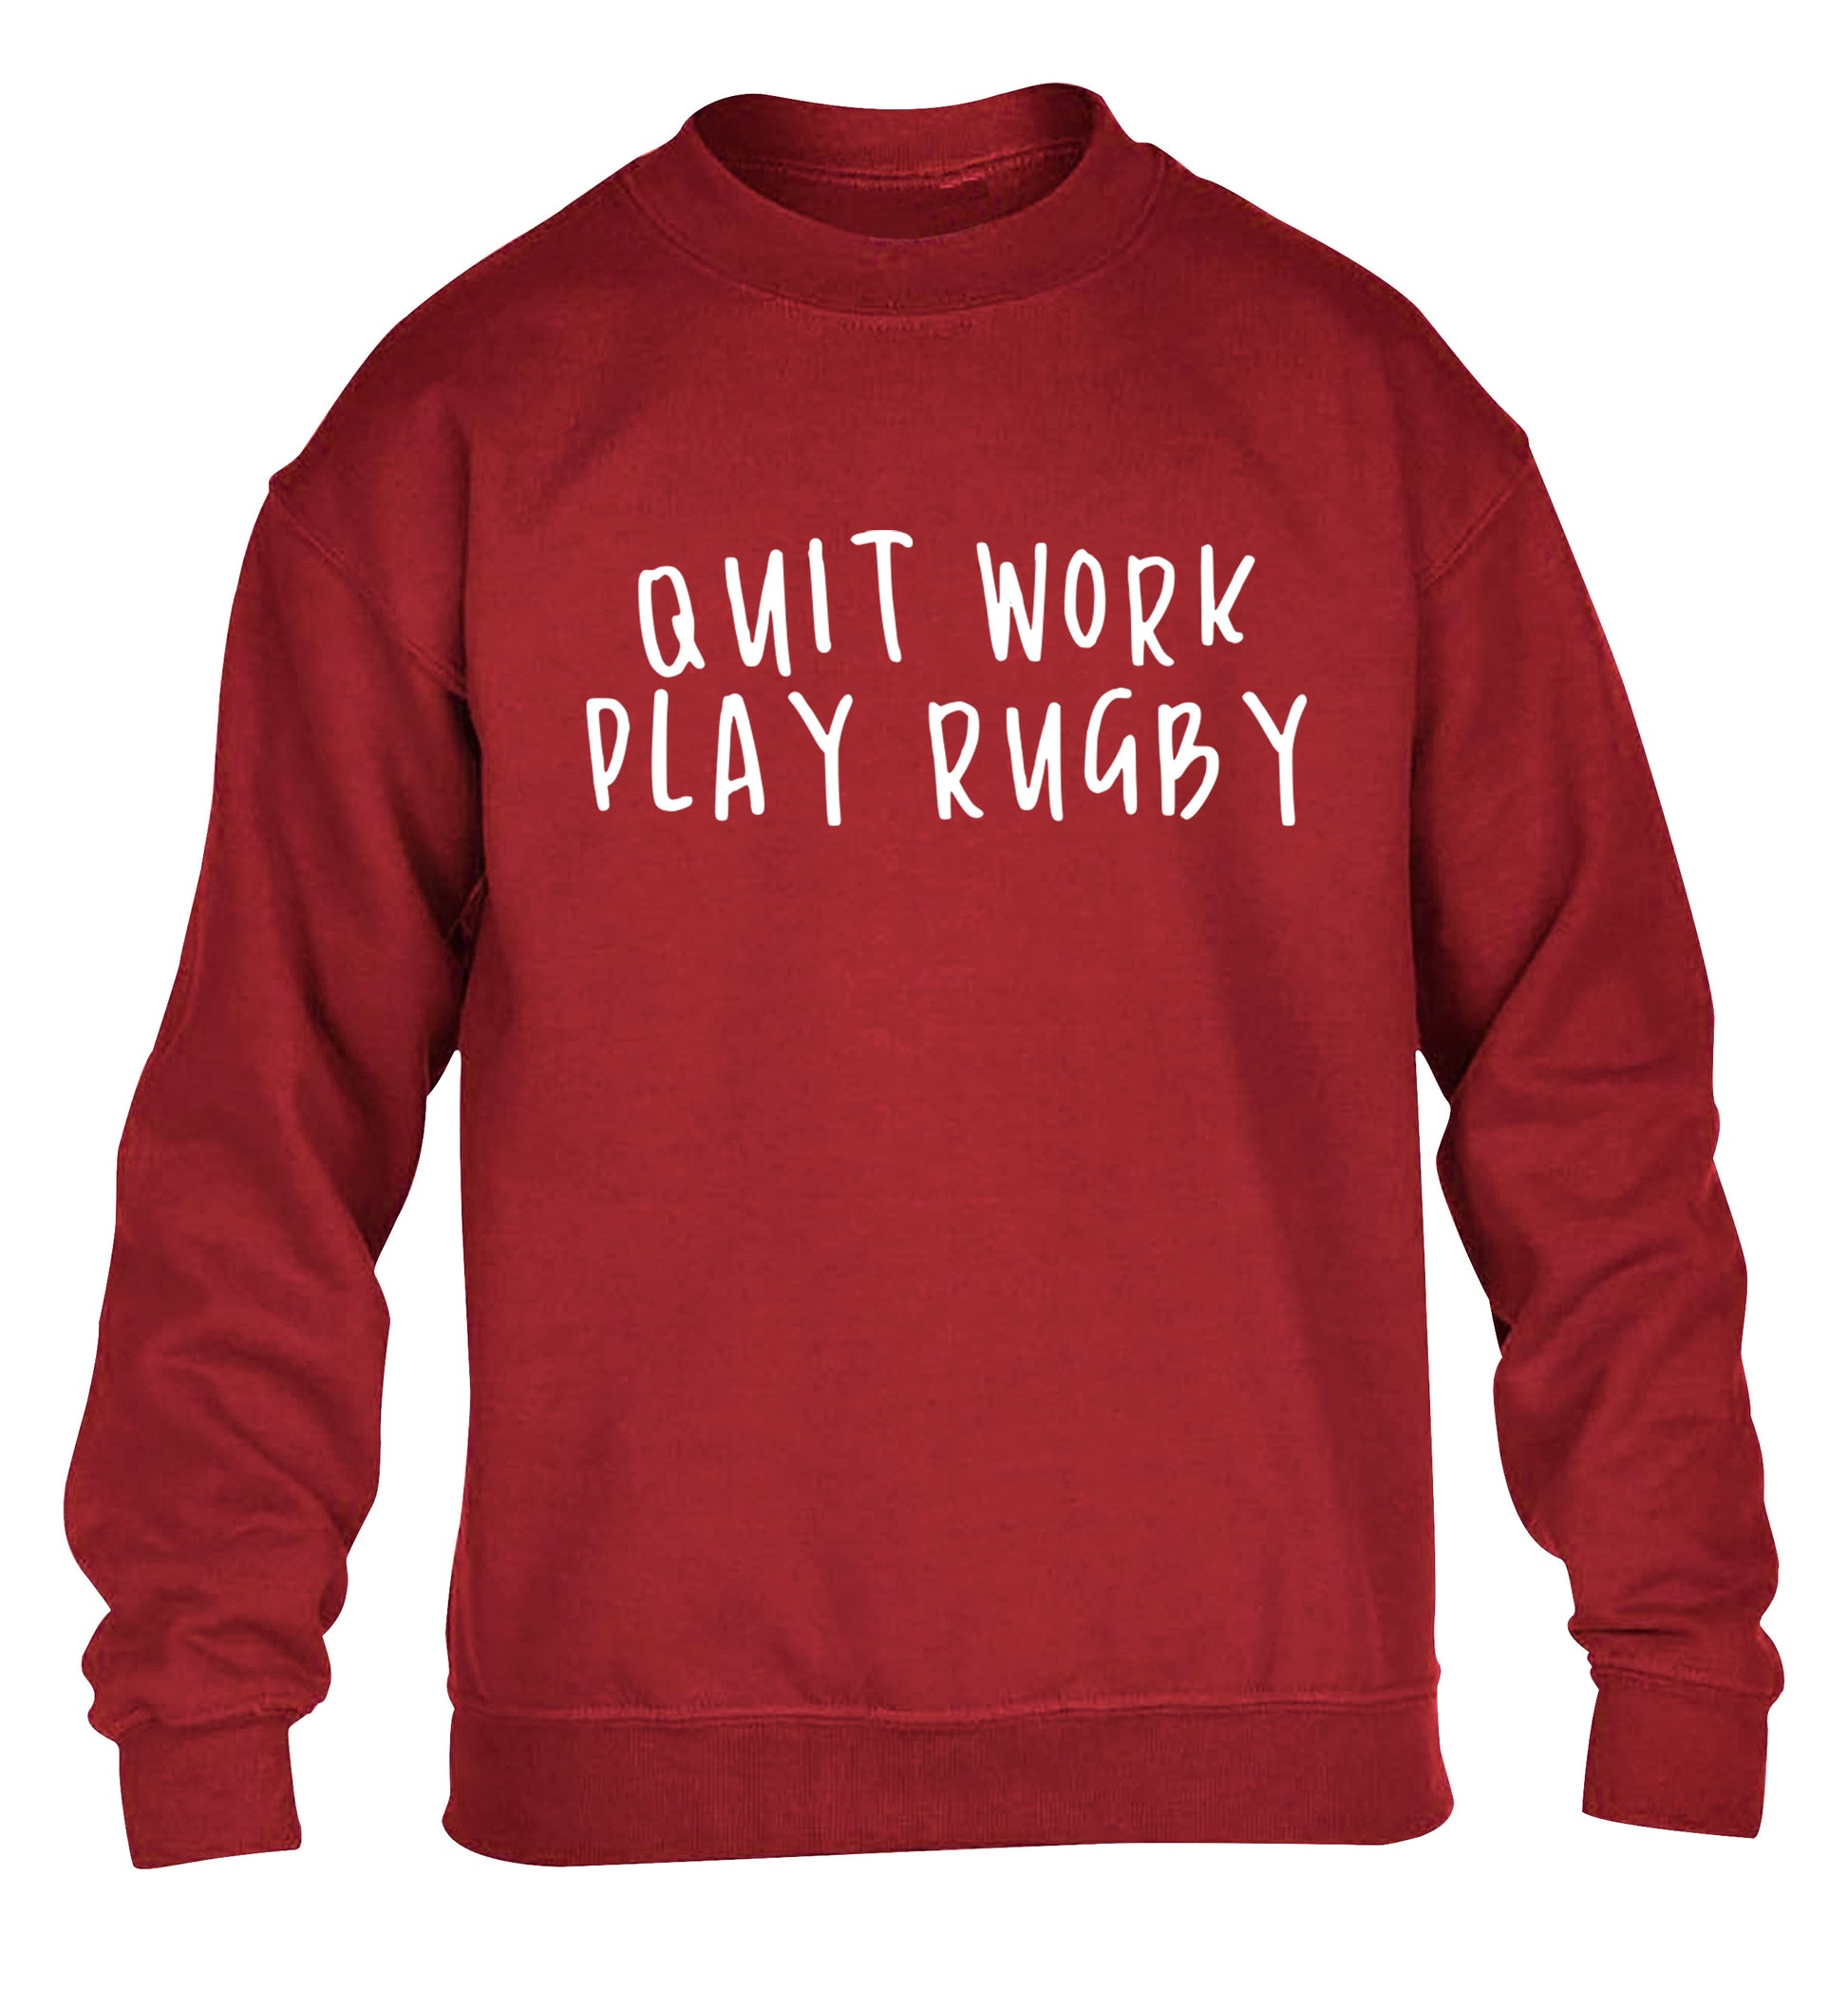 Quit work play rugby children's grey sweater 12-13 Years